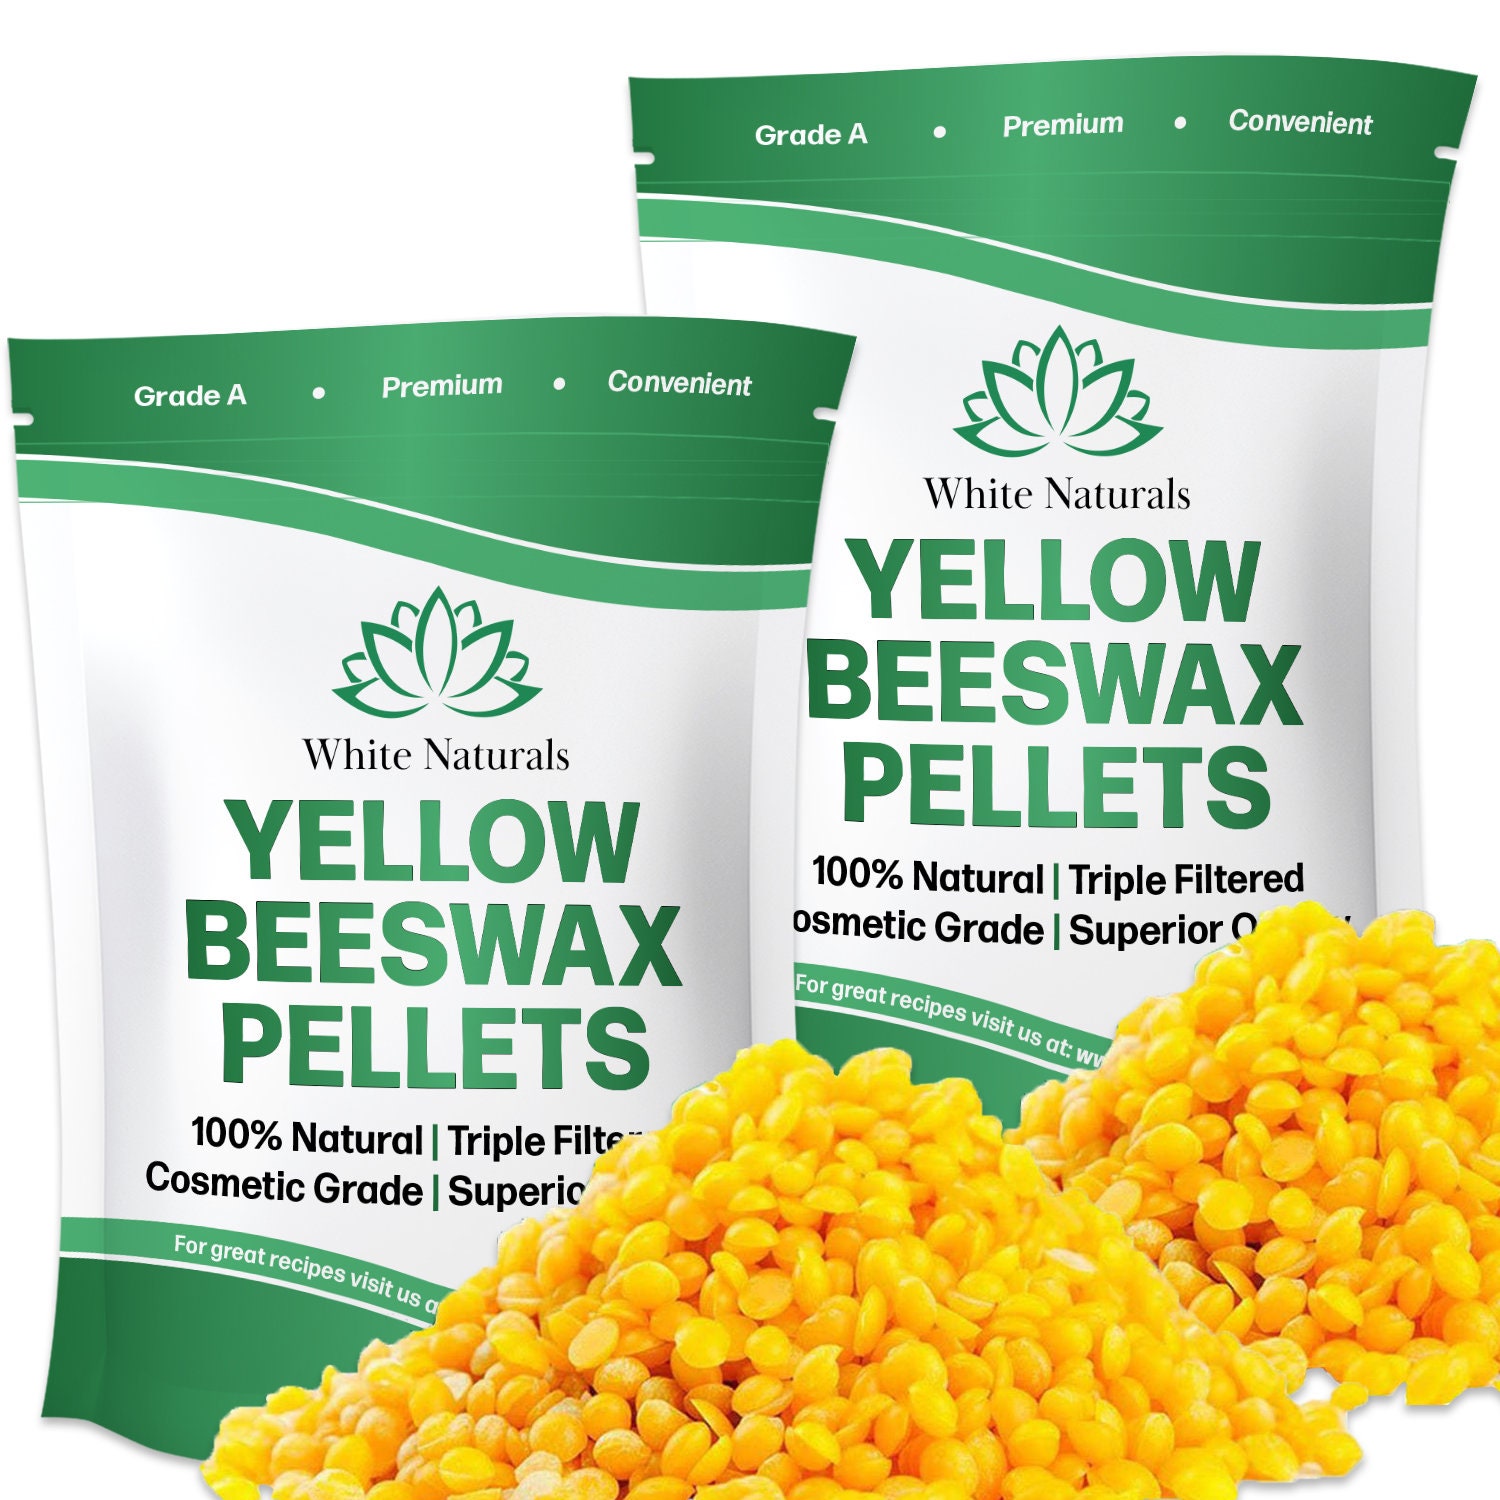 Organic Yellow Beeswax Pellets 1 lb, Pure, Natural, Cosmetic Grade Bees Wax,  Triple Filtered, Great for Diy Lip Balm, Food Wrap, Lotions 